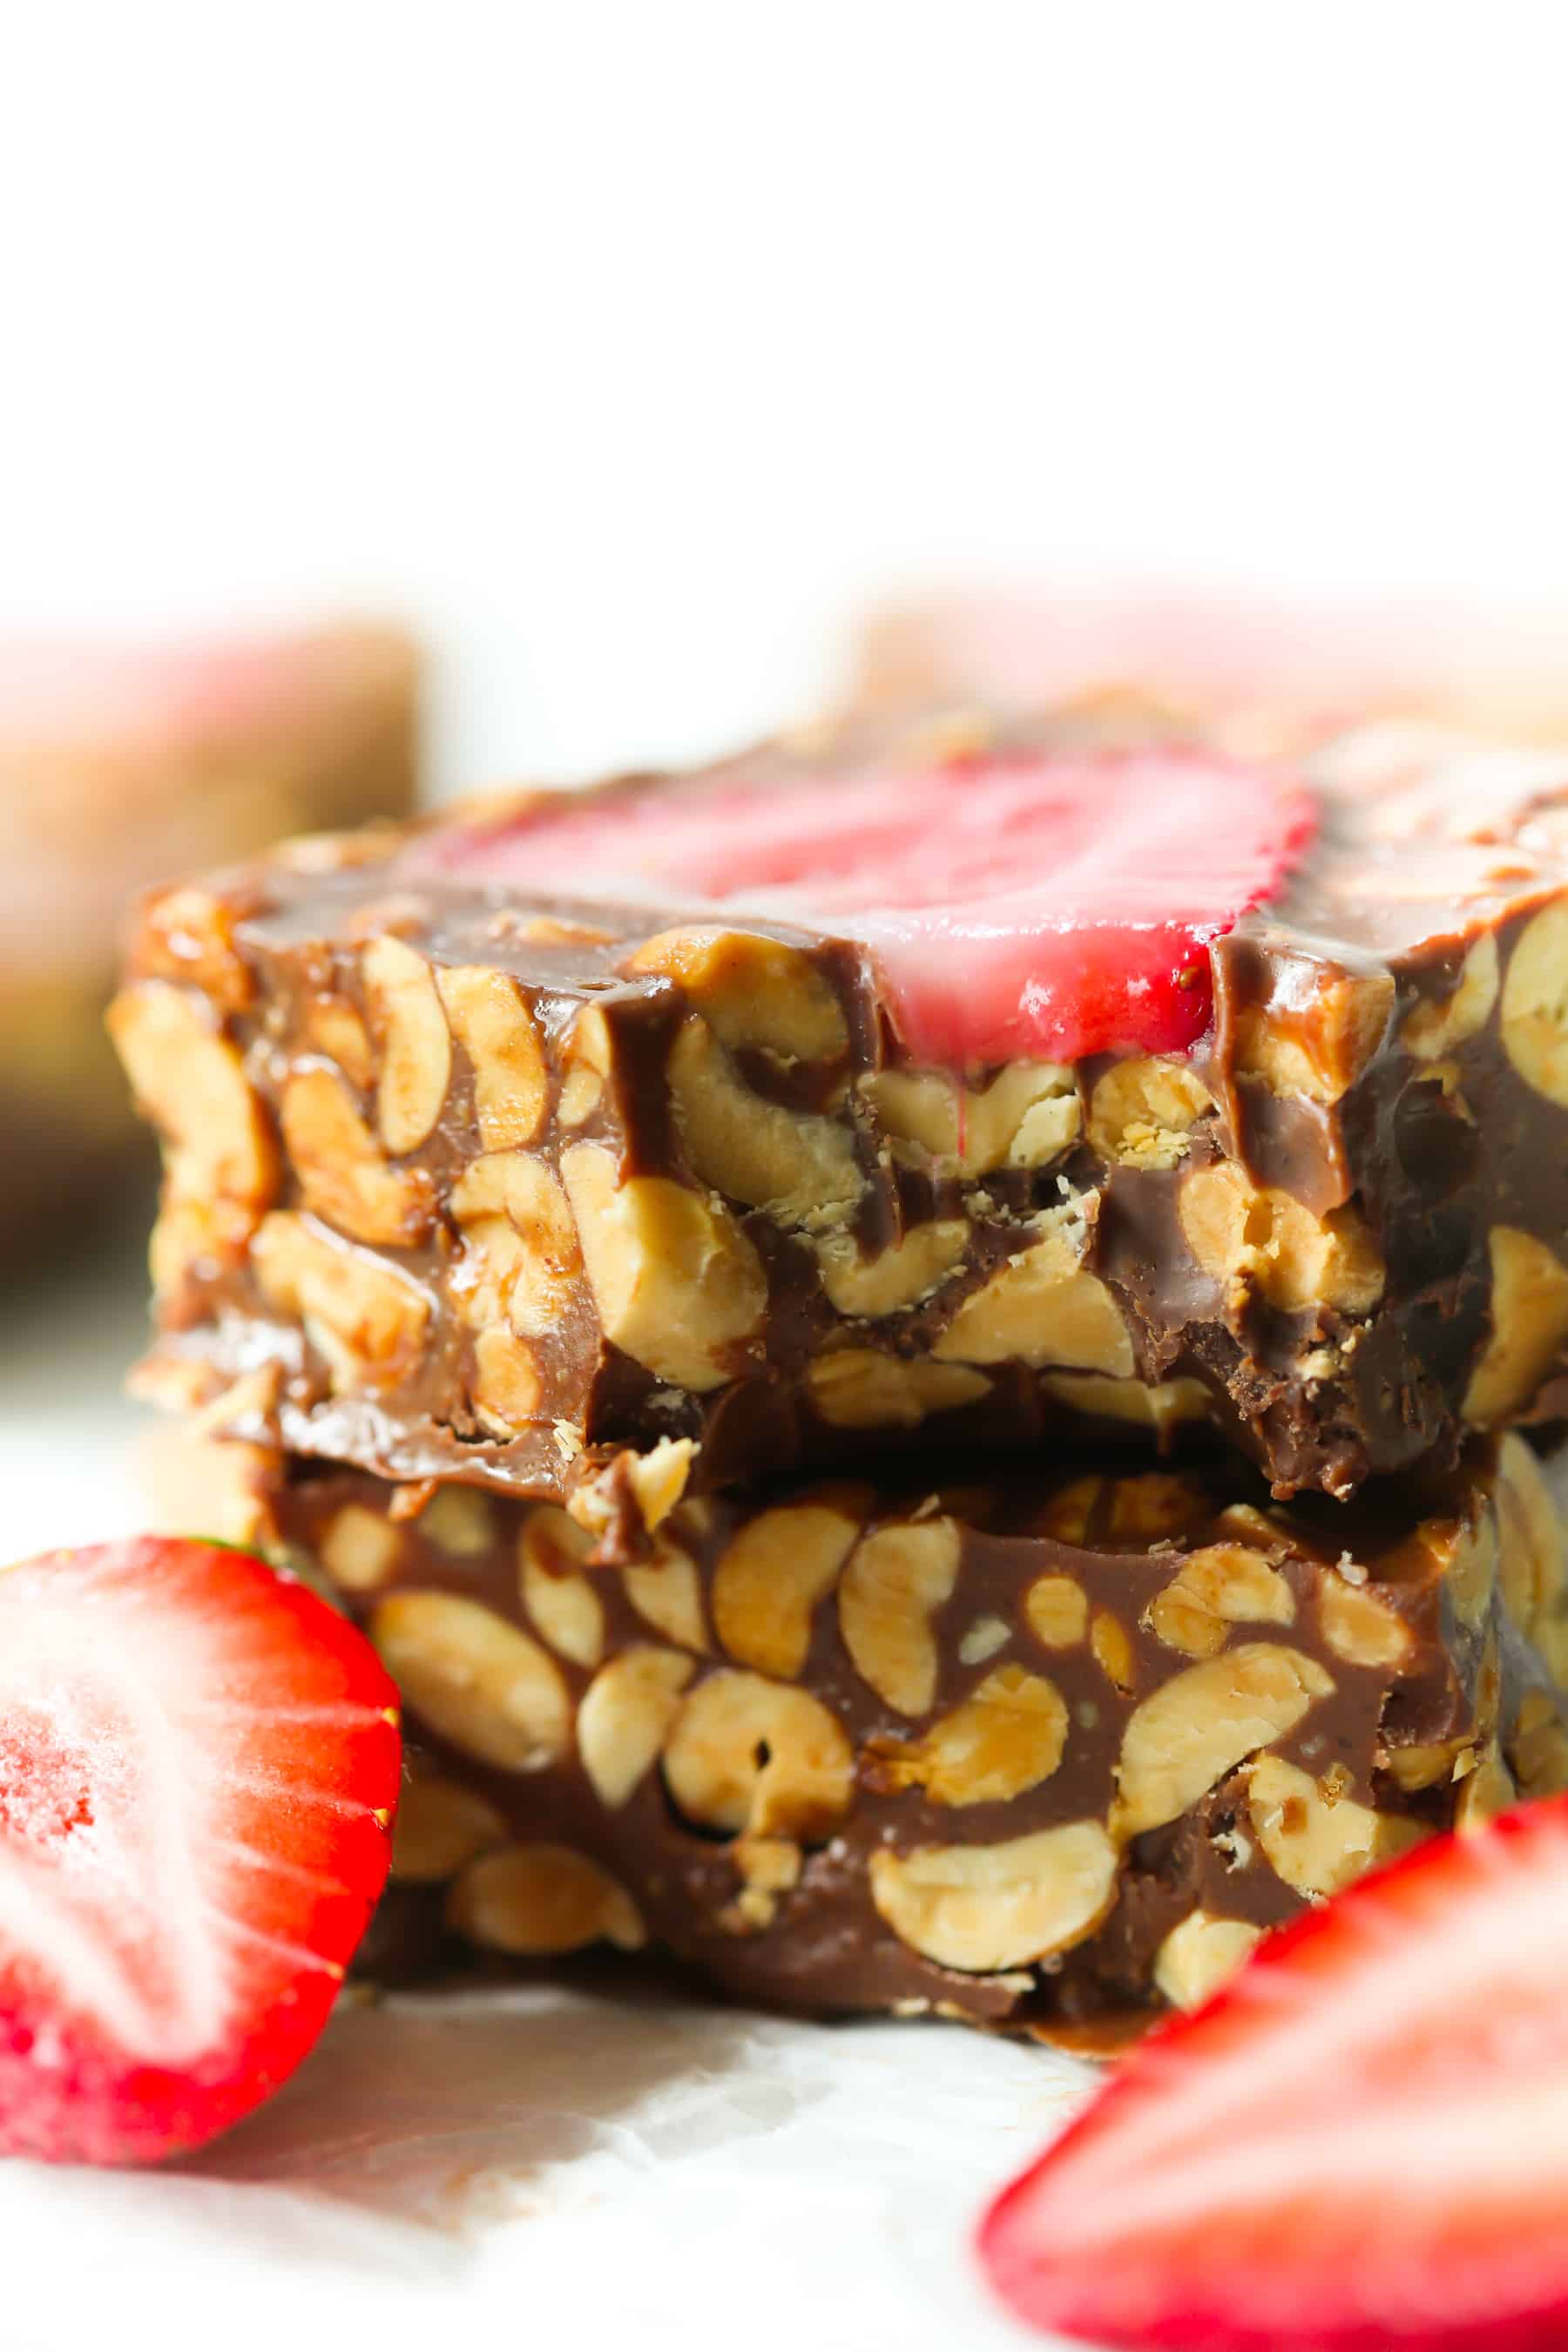  Low-Carb No Bake Chocolate Strawberry Bars - These low-carb no bake chocolate strawberry bars are easy to make, perfect for summer dessert, vegan and gluten-free. 